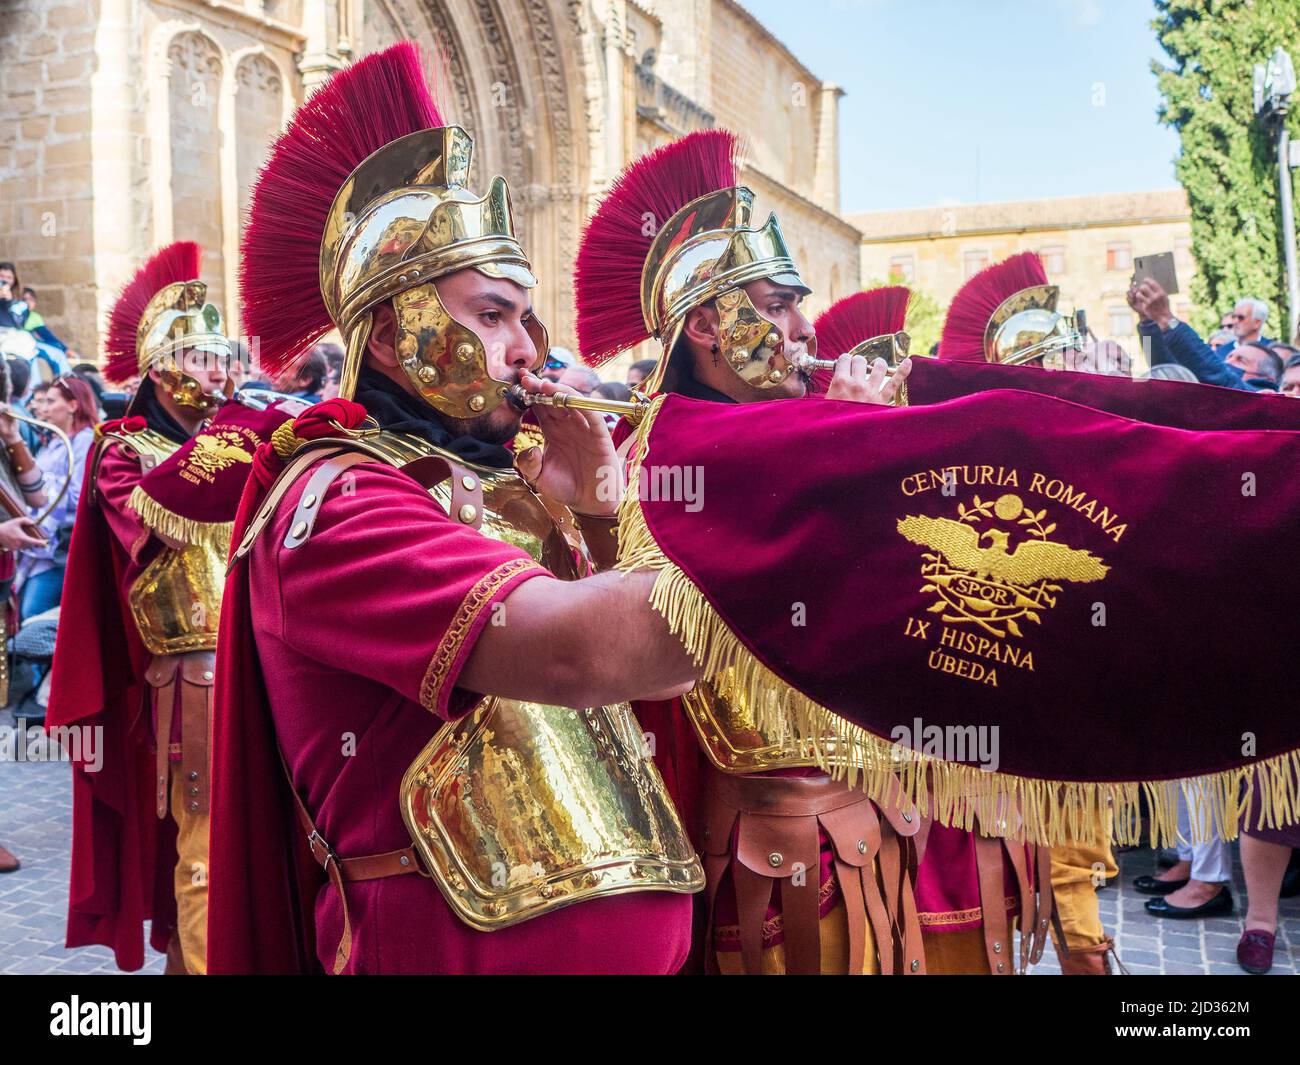 Drum and trumpet band parading through the streets of Ubeda during the celebration of the traditional Semana Santa (Holy Week). Stock Photo